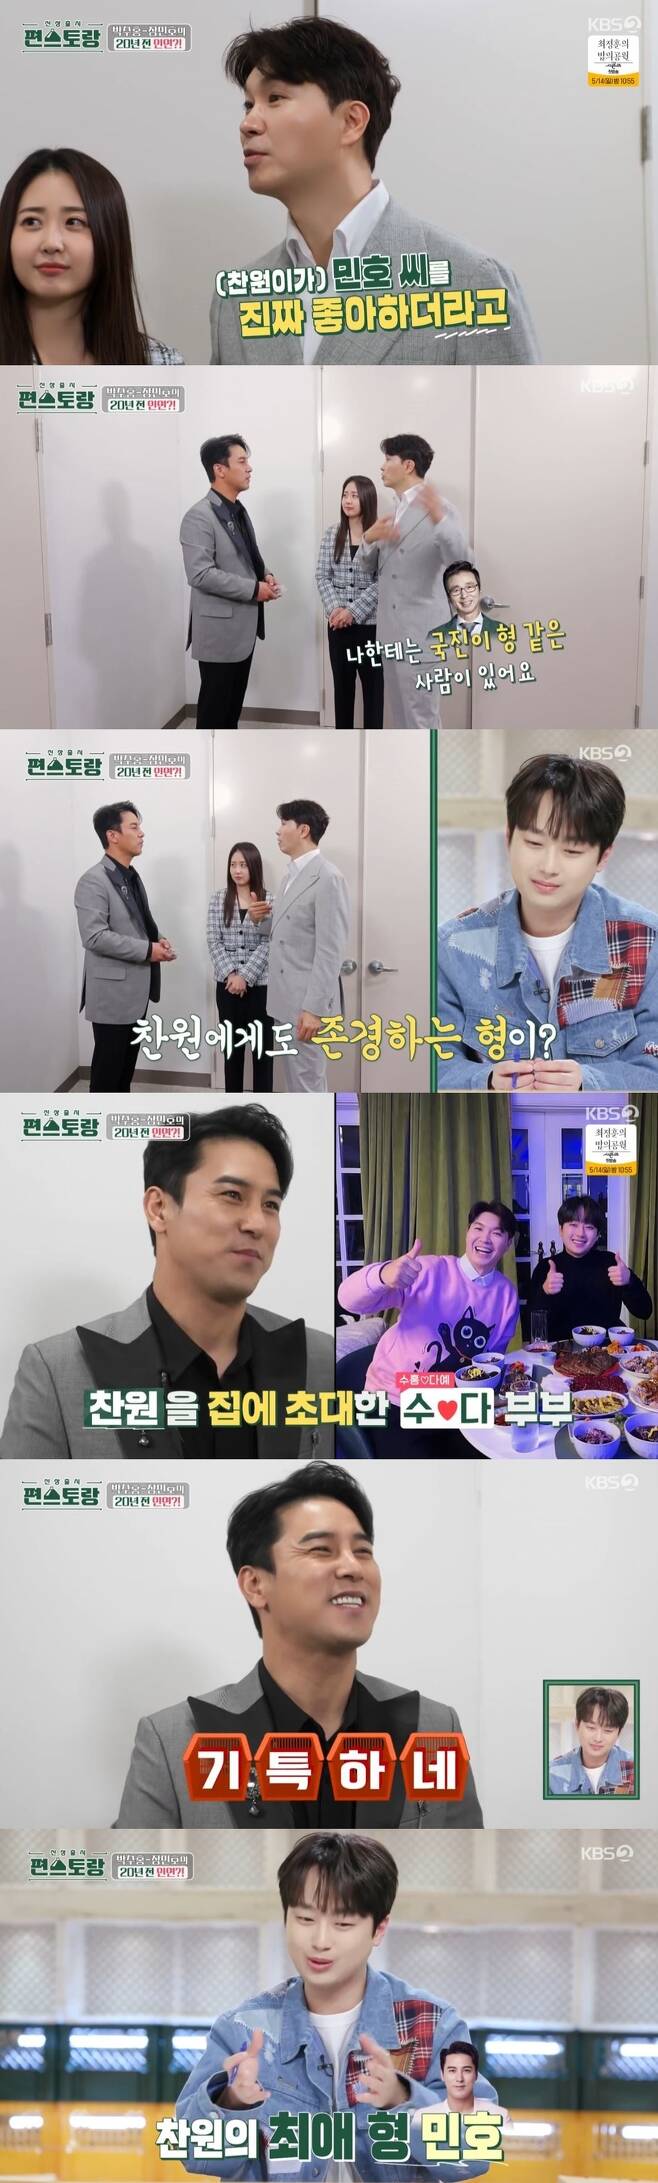 Ichan yuan talked about his mind toward Jang Min-Ho.Park Soo-hong and Kim Da-ye attended an event and met singer Jang Min-Ho at KBS 2TV Stars Top Recipe at Fun-Staurant broadcast on May 5th.On this day, Park Soo-hong and Kim Da-ye presented Jang Min-Ho with his own Chocolate, and had a pleasant conversation.Park Soo-hong said, But chan yuan came to my house and chan yuan really liked Minho.He said, I have a brother like Kukjin, Yongman, and acceptance, but he also has a respectable brother, and he told me about Minho.Jang Min-Ho responded with delightful and was happy.Ichan yuan, who watched the meeting of two people in the studio, once again emphasized the sincerity of Jang Min-Ho, saying, I am a real admirer.